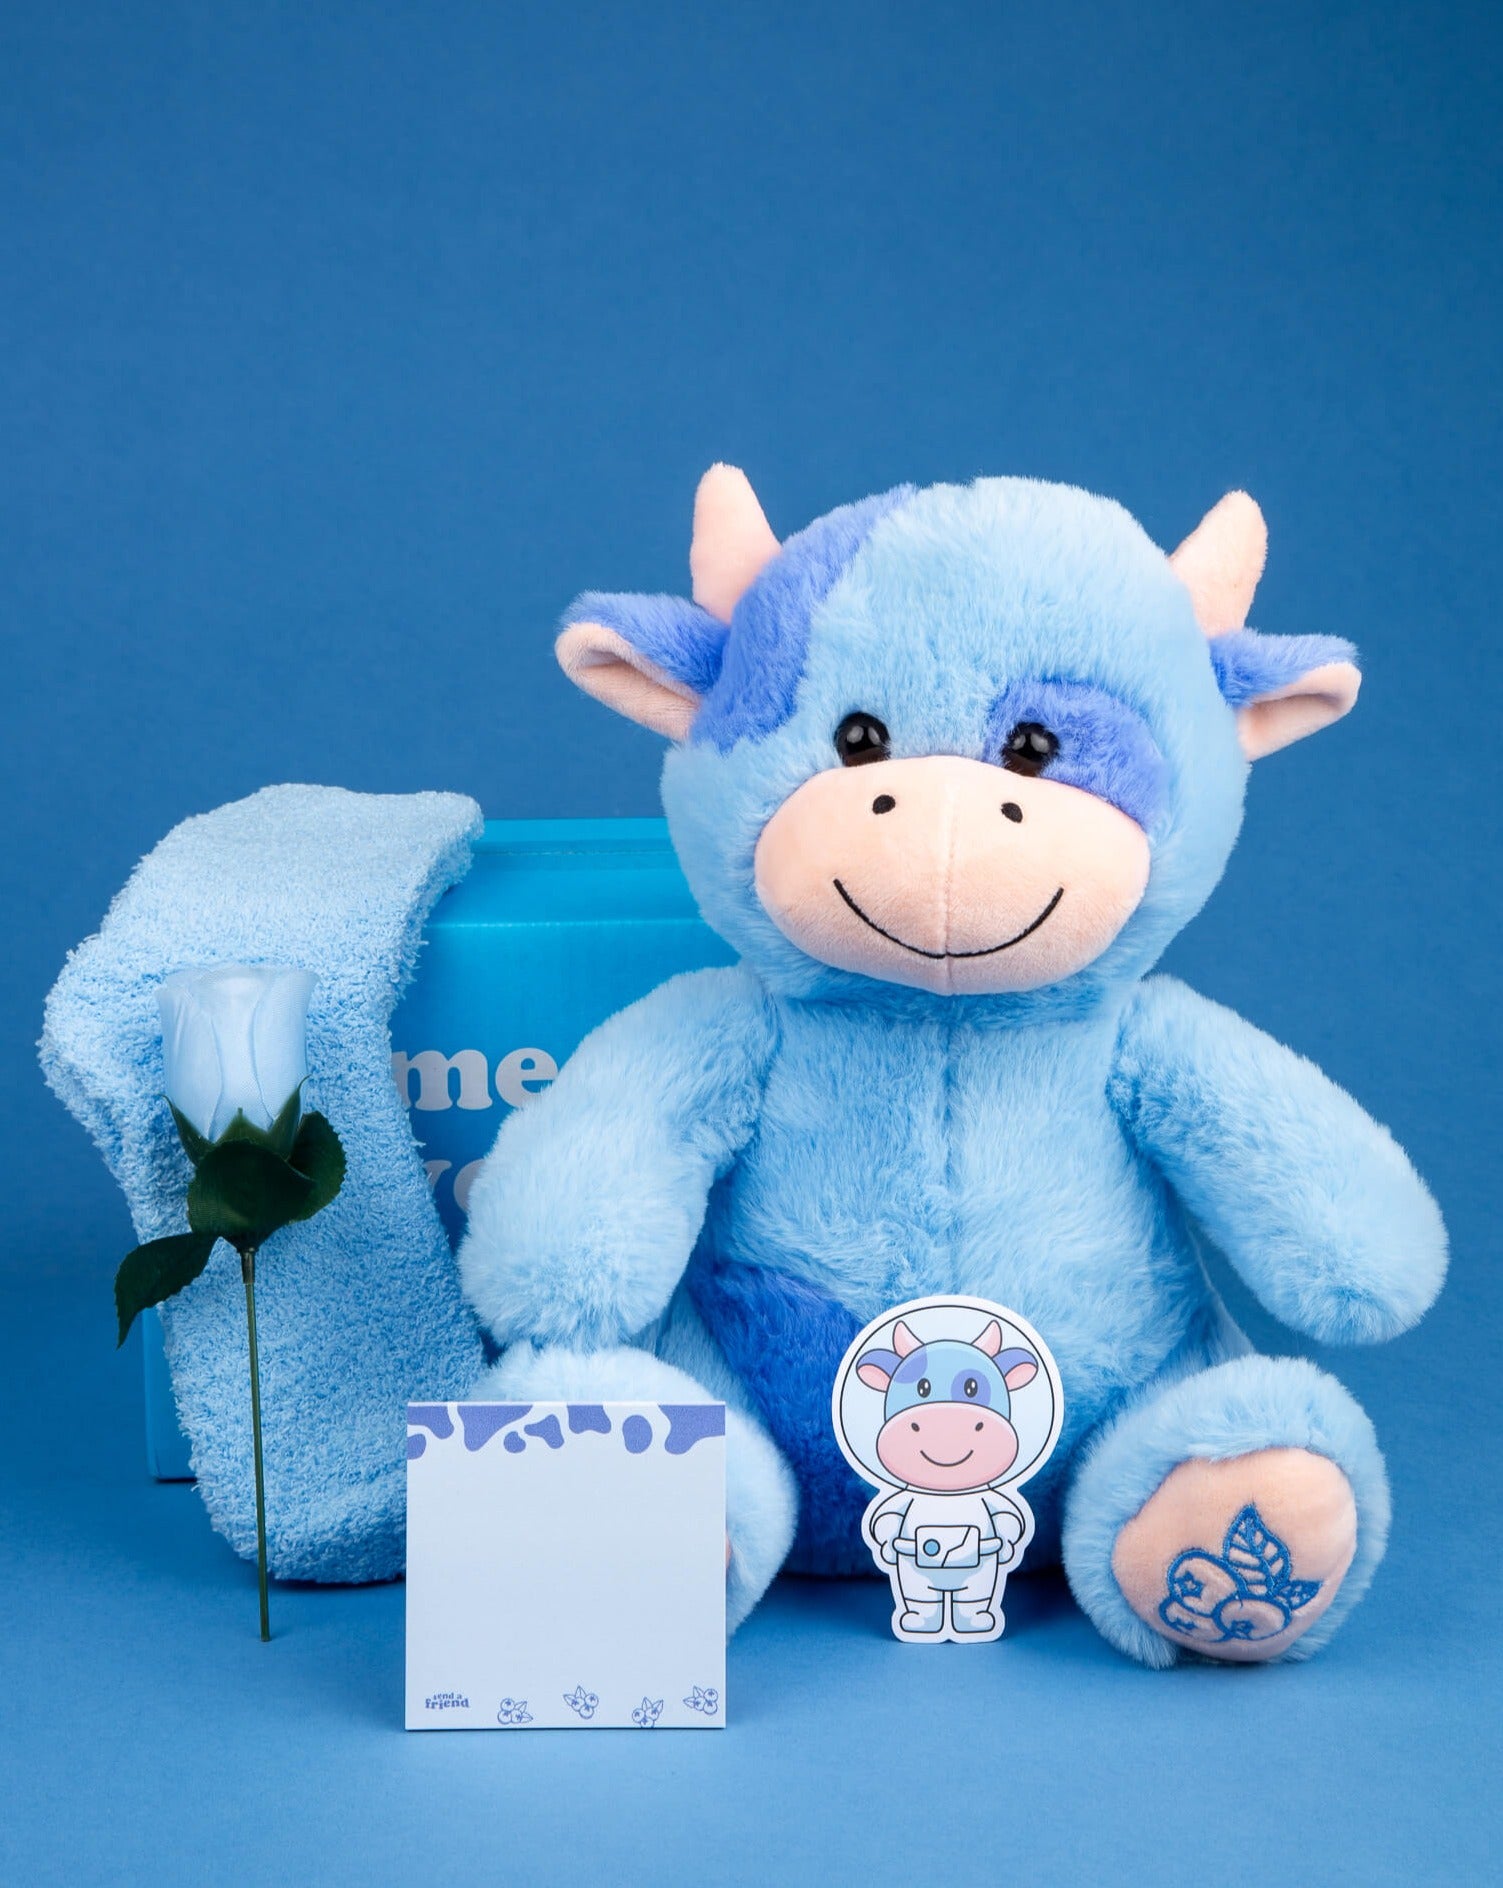 Photo of Beau the Blueberry Cow plushie with blue fuzzy socks, light blue silk rose, blueberry-themed sticky notes, blueberry cow sticker, and blue box on a blue background